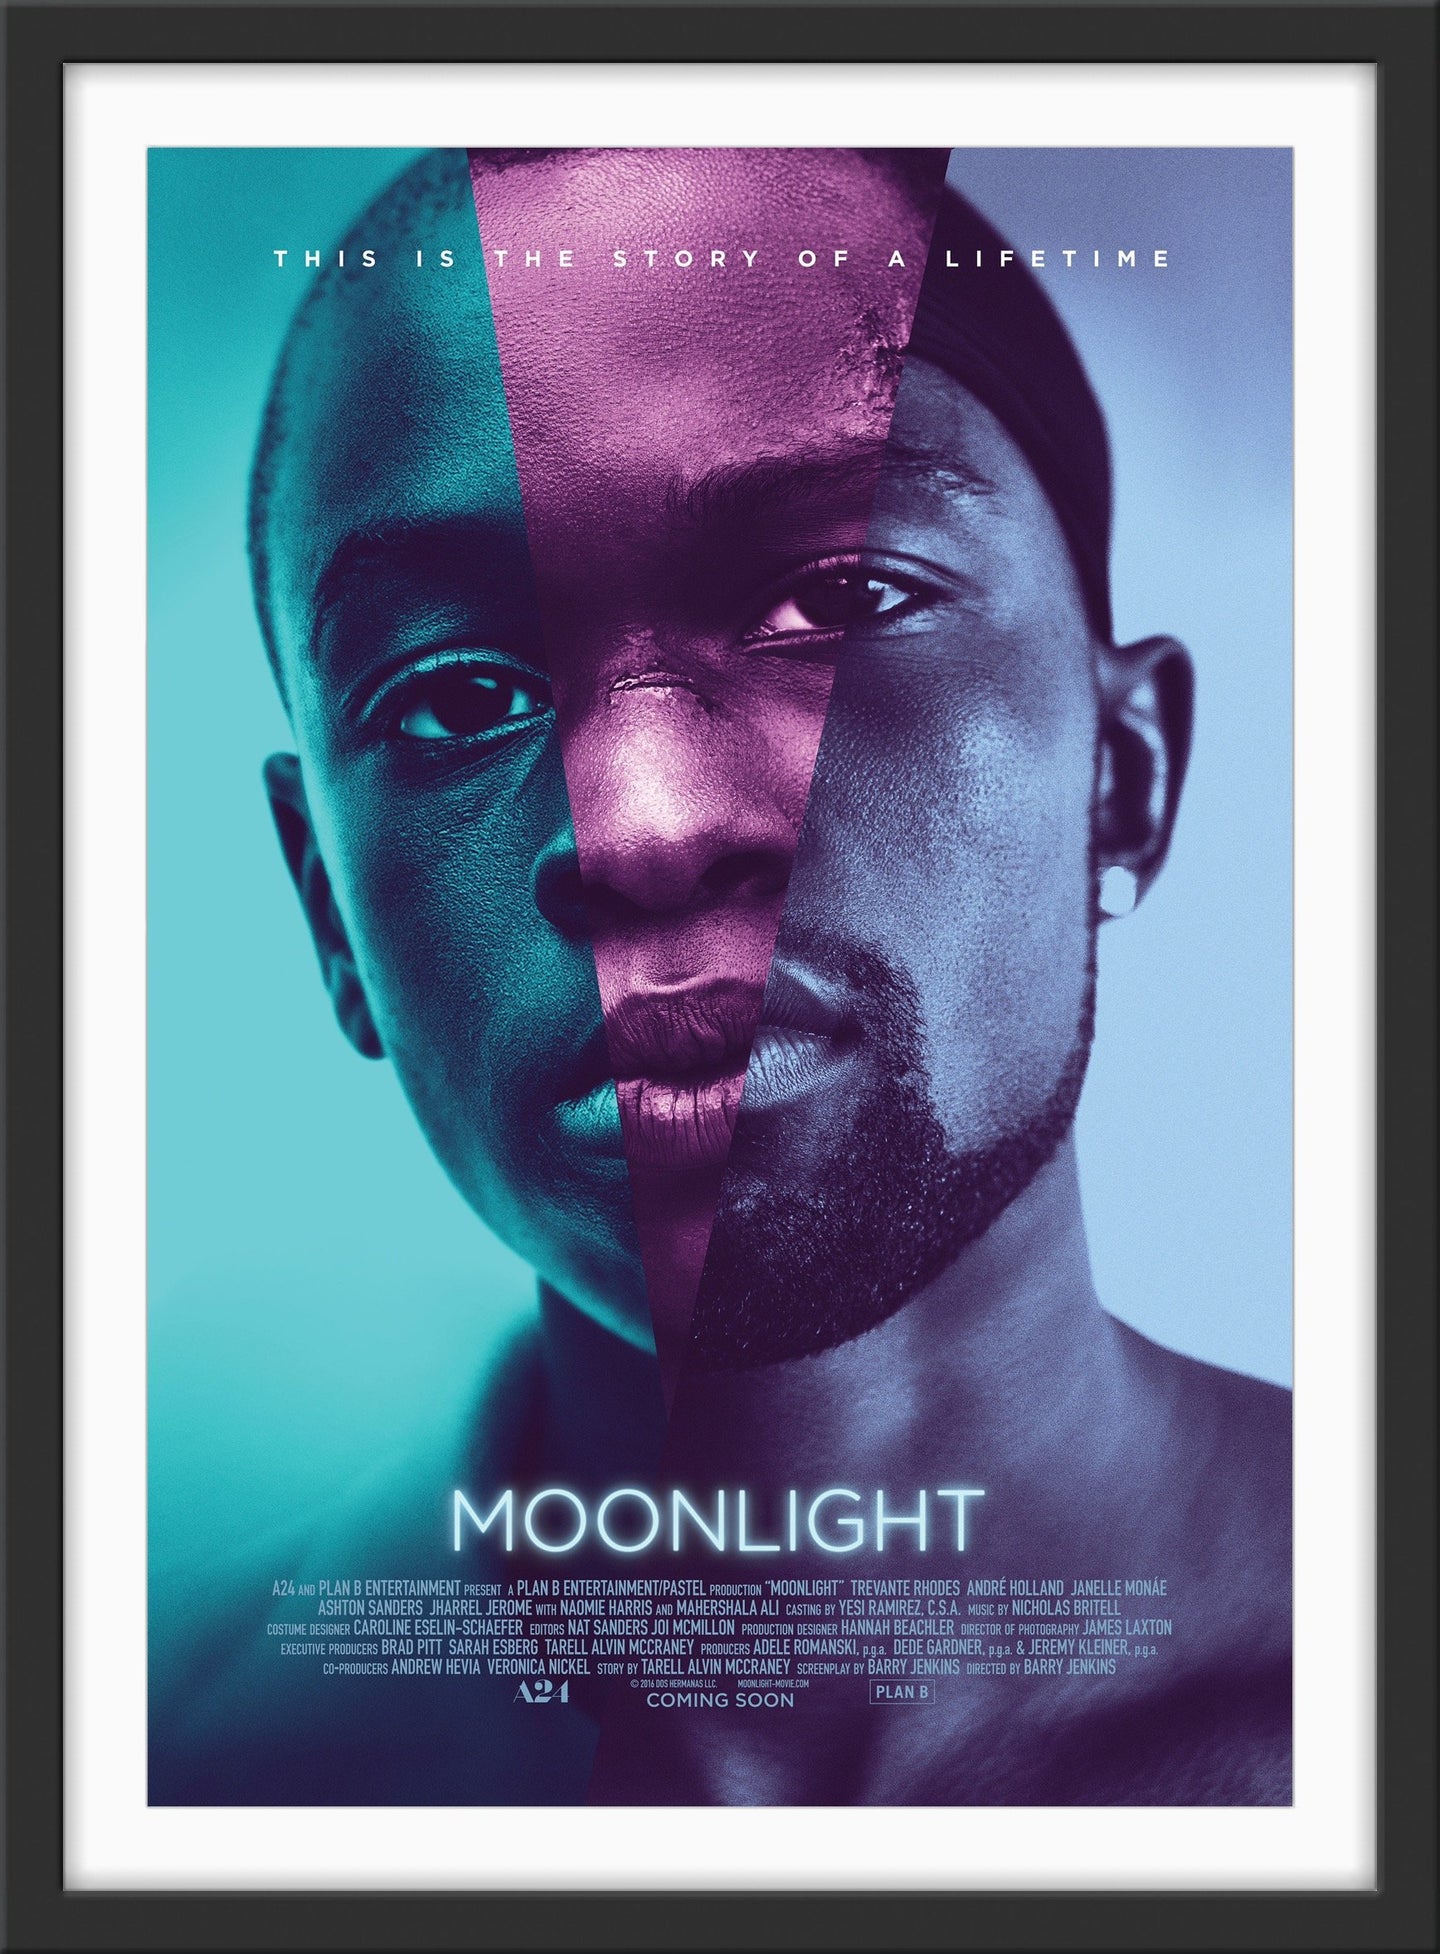 An original movie poster for the A24 film Moonlight